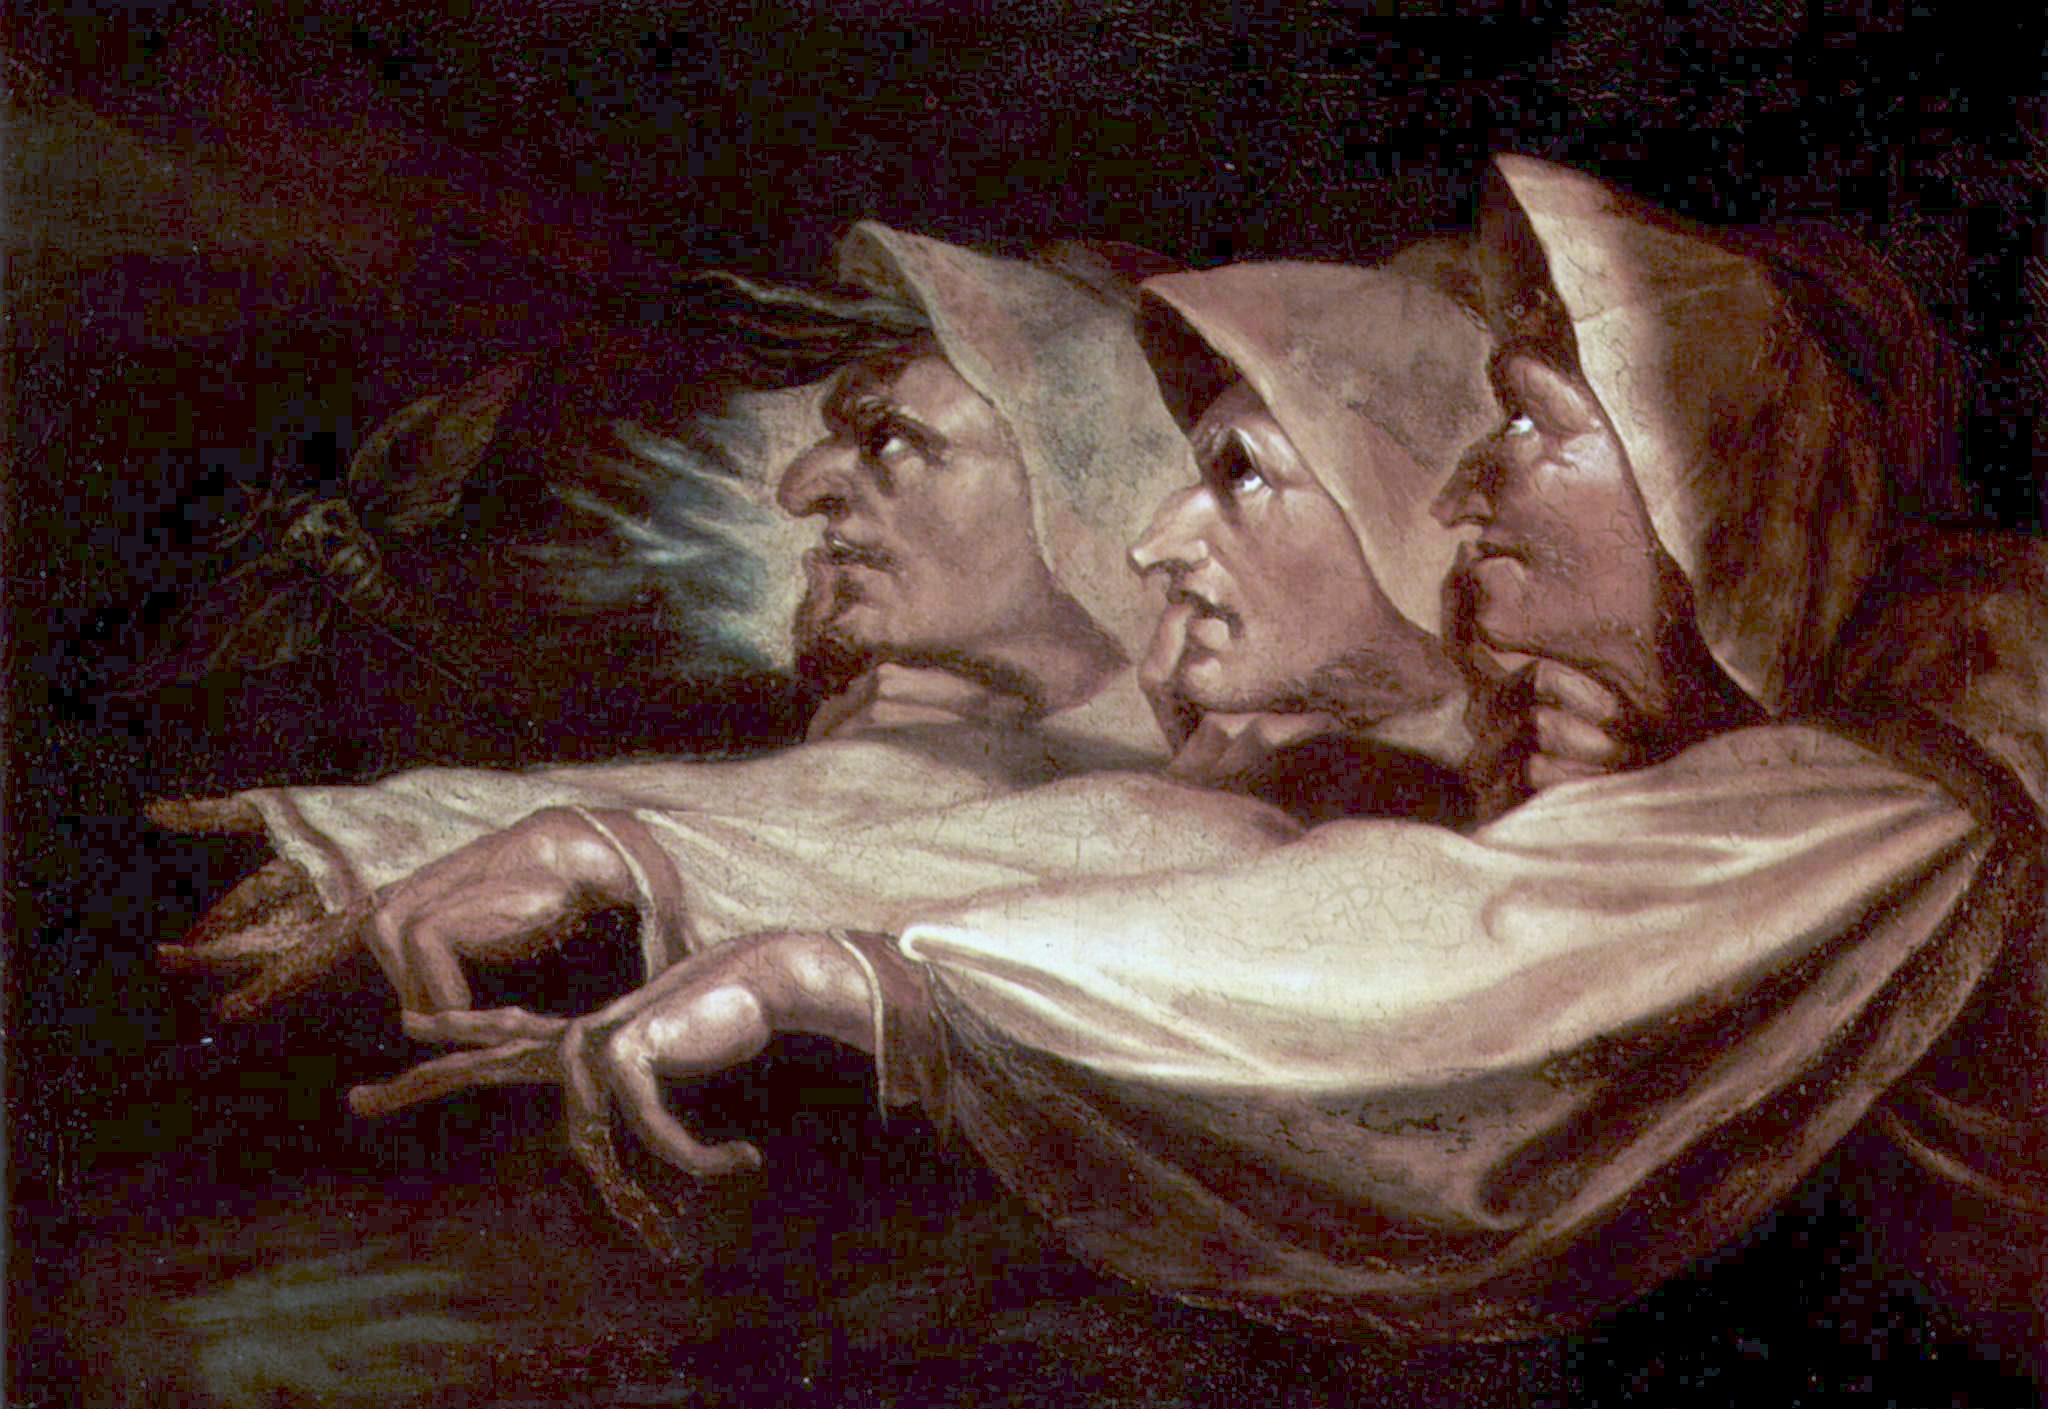 presentation of the witches in macbeth